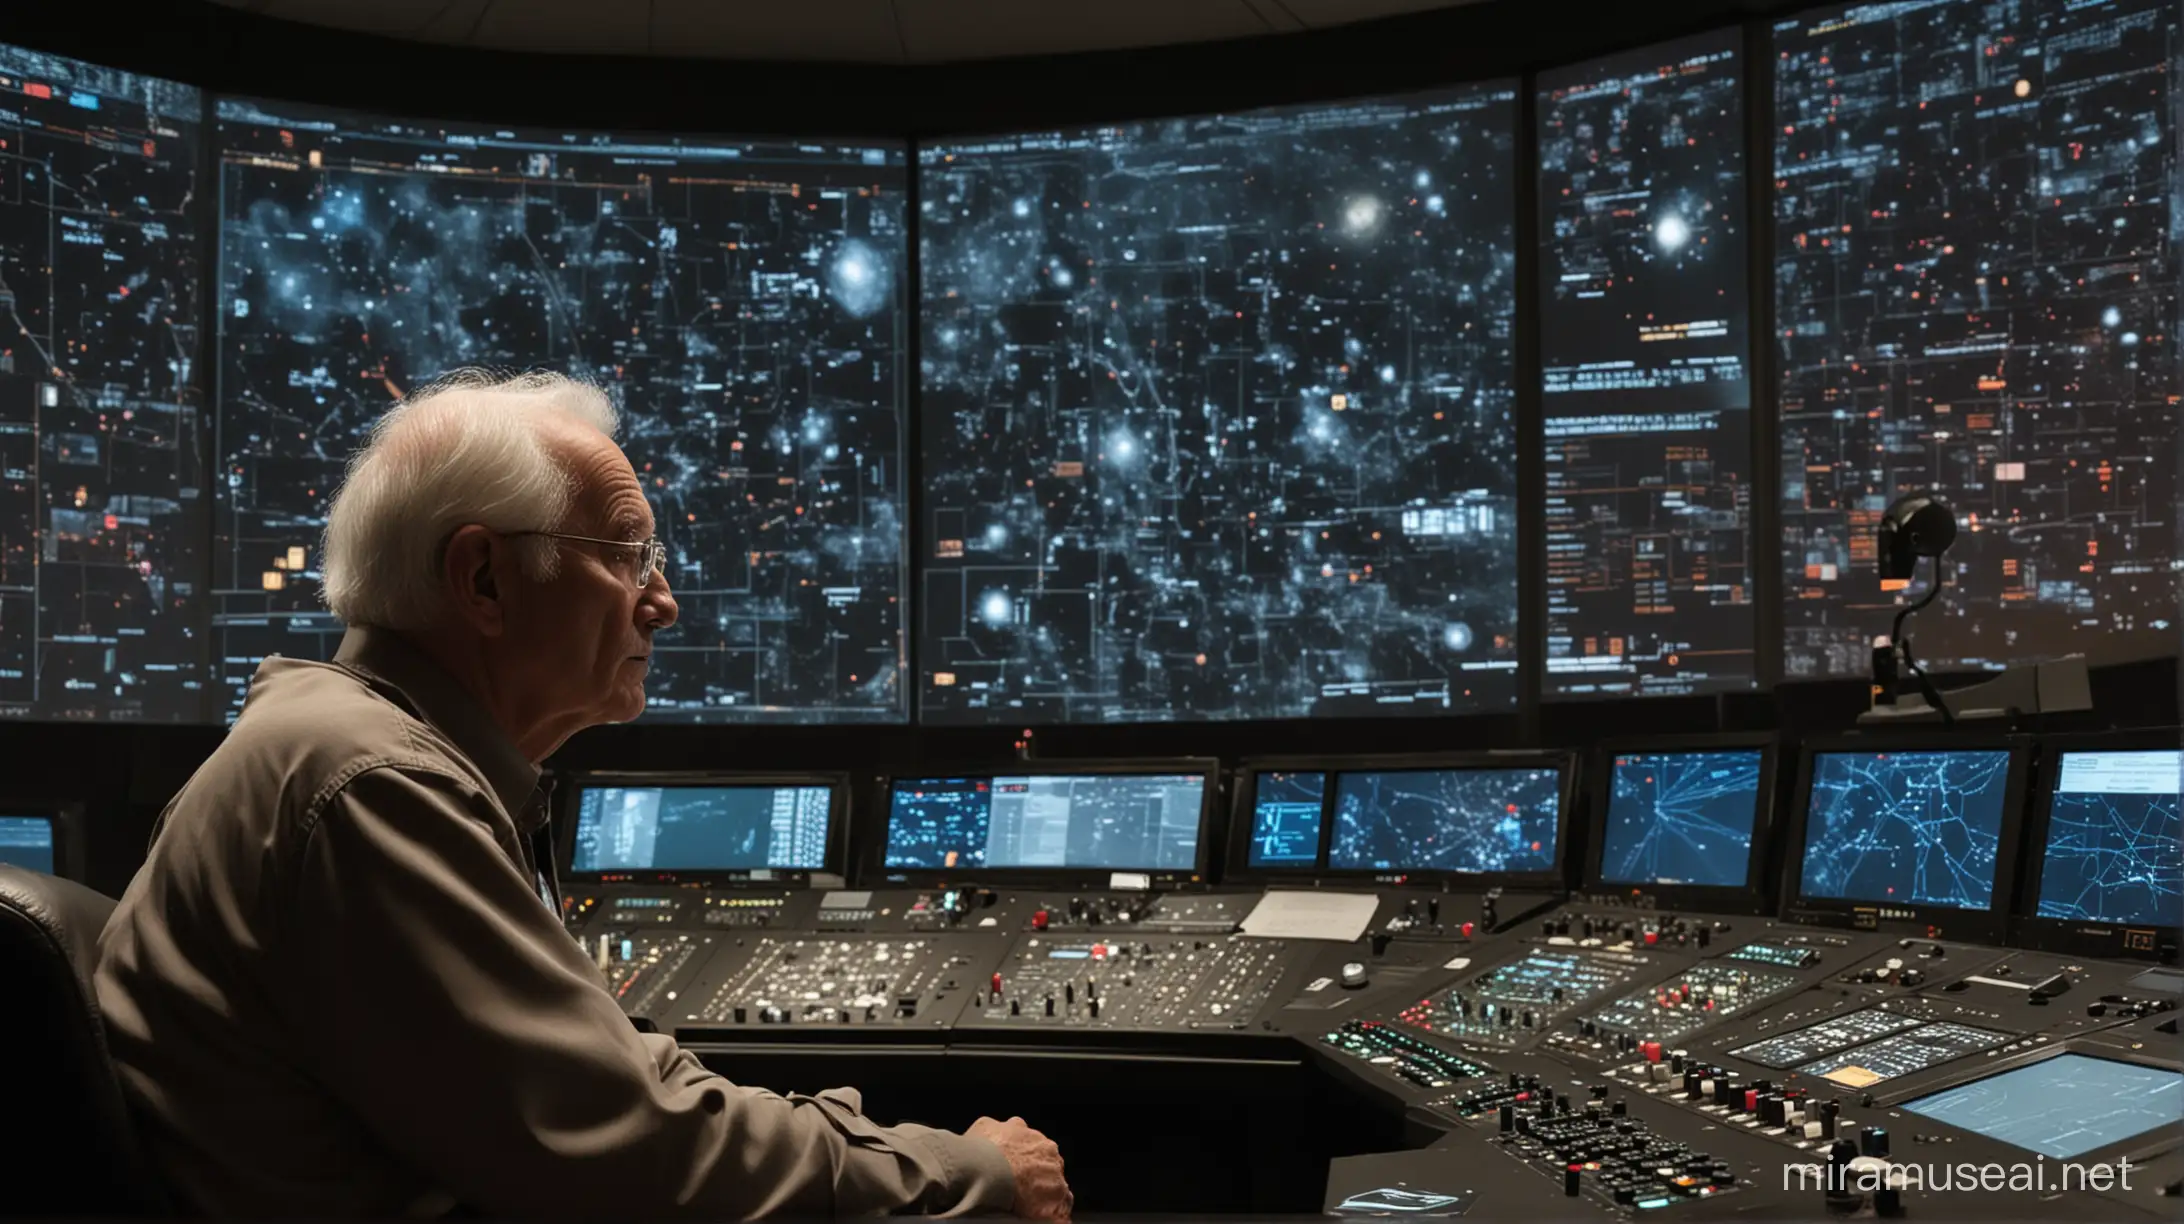 Illustrate a scene of quiet contemplation in the observatory's control room, with Jerry Ehman seated at the console, surrounded by screens displaying data from the cosmos. Show him deep in thought, his eyes alight with a spark of curiosity as he reflects on the profound implications of the Wow Signal. Let the image evoke a sense of wonder and humility, reminding viewers of the tantalizing mysteries that lurk within the depths of the universe, forever beyond the grasp of human comprehension